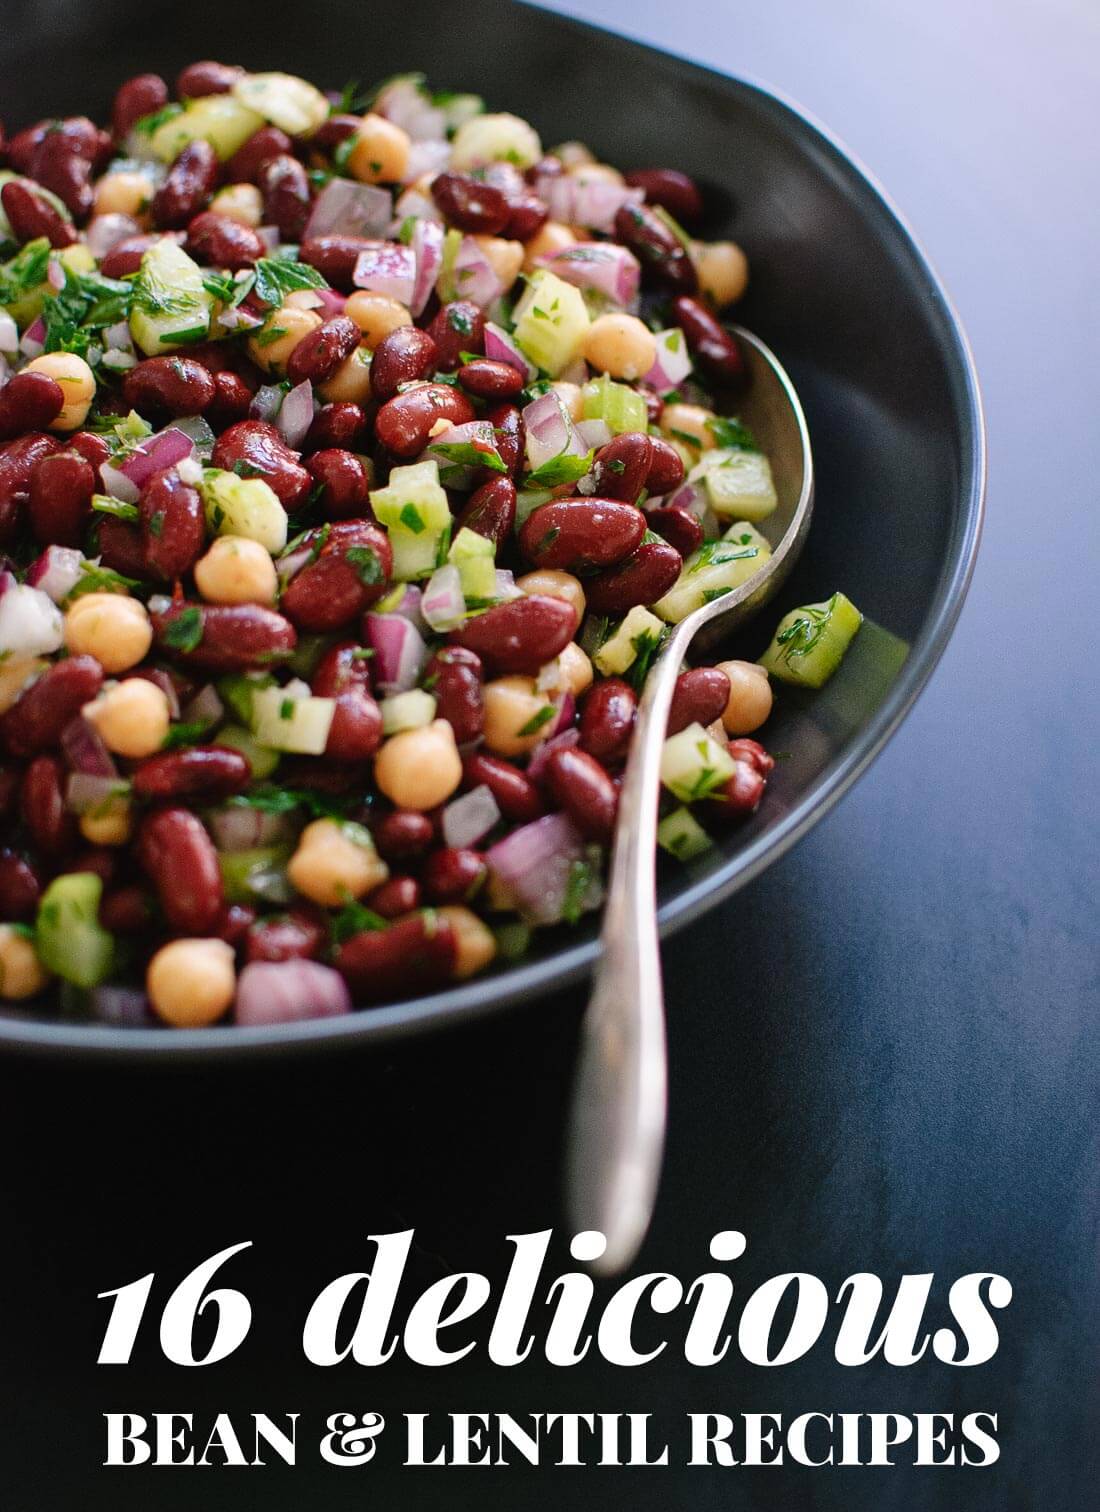 Find 16 amazing recipes made with black beans, chickpeas, lentils and more! All these recipes are vegetarian but rich in protein thanks to beans. cookieandkate.com